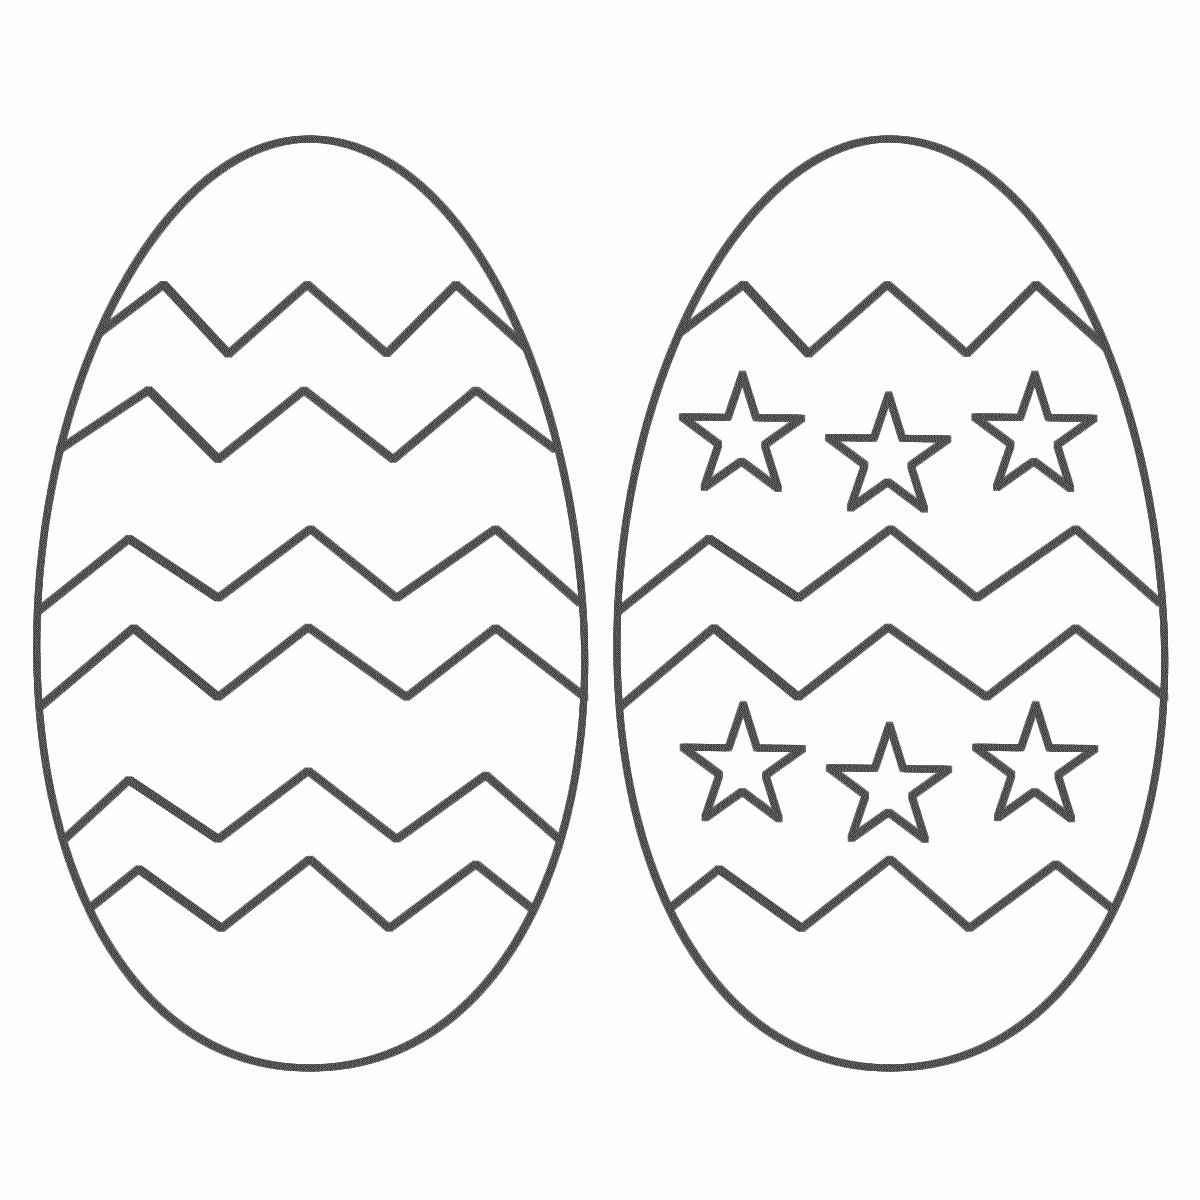 Free Printable Easter Egg Coloring Pages For Kids - Easter Egg Coloring Pages Free Printable